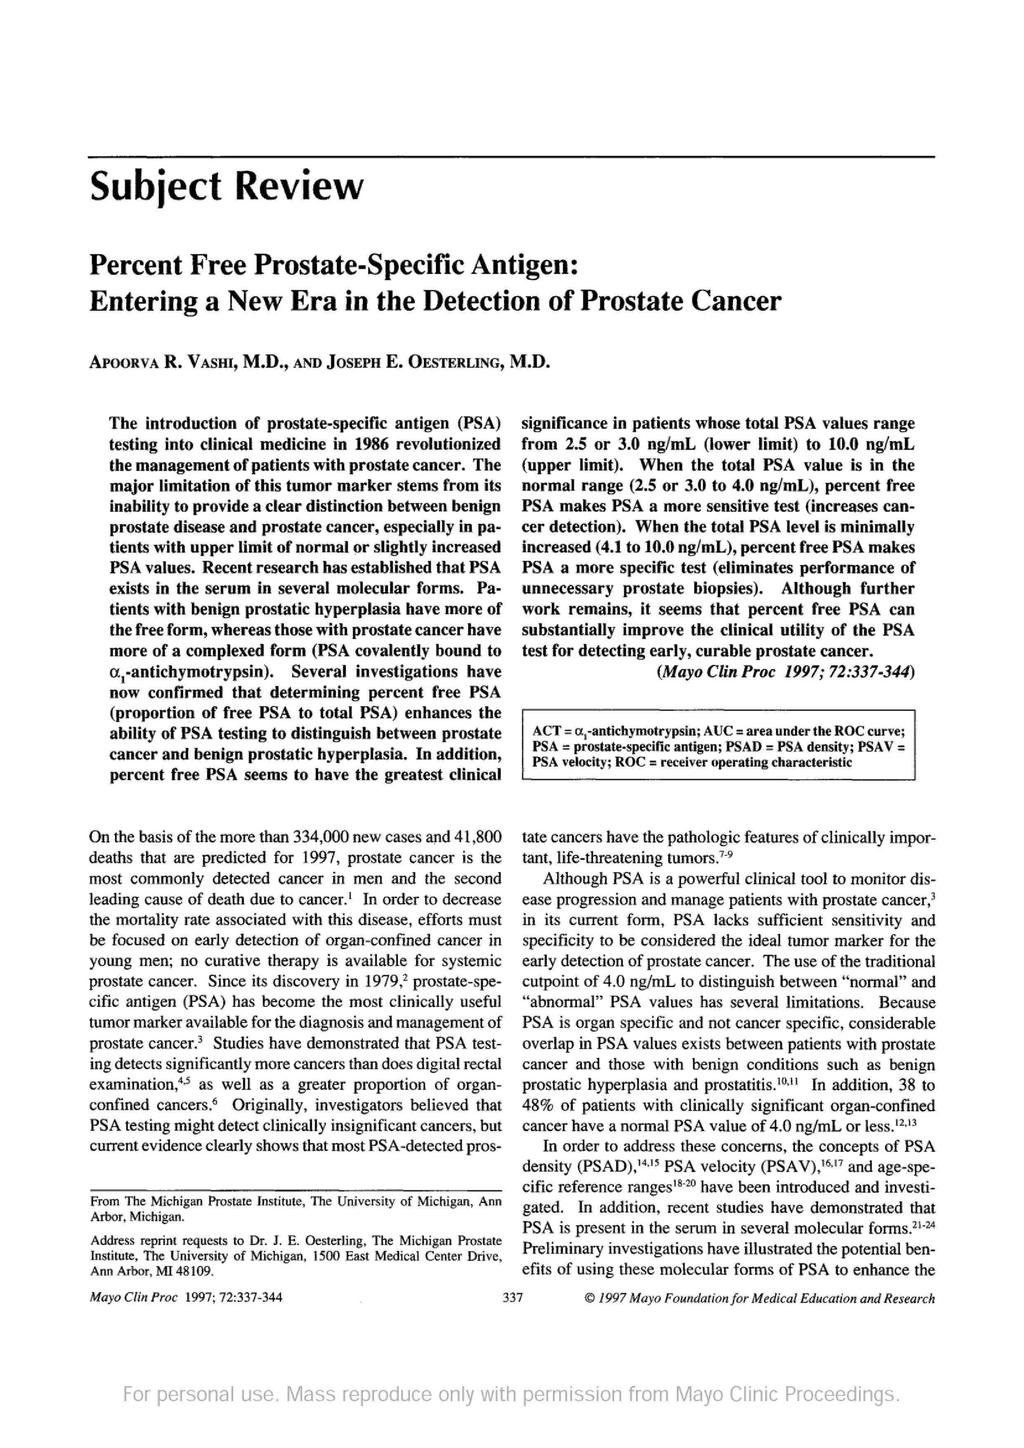 Subject Review Percent Free Prostate-Specific Antigen: Entering a New Era in the De